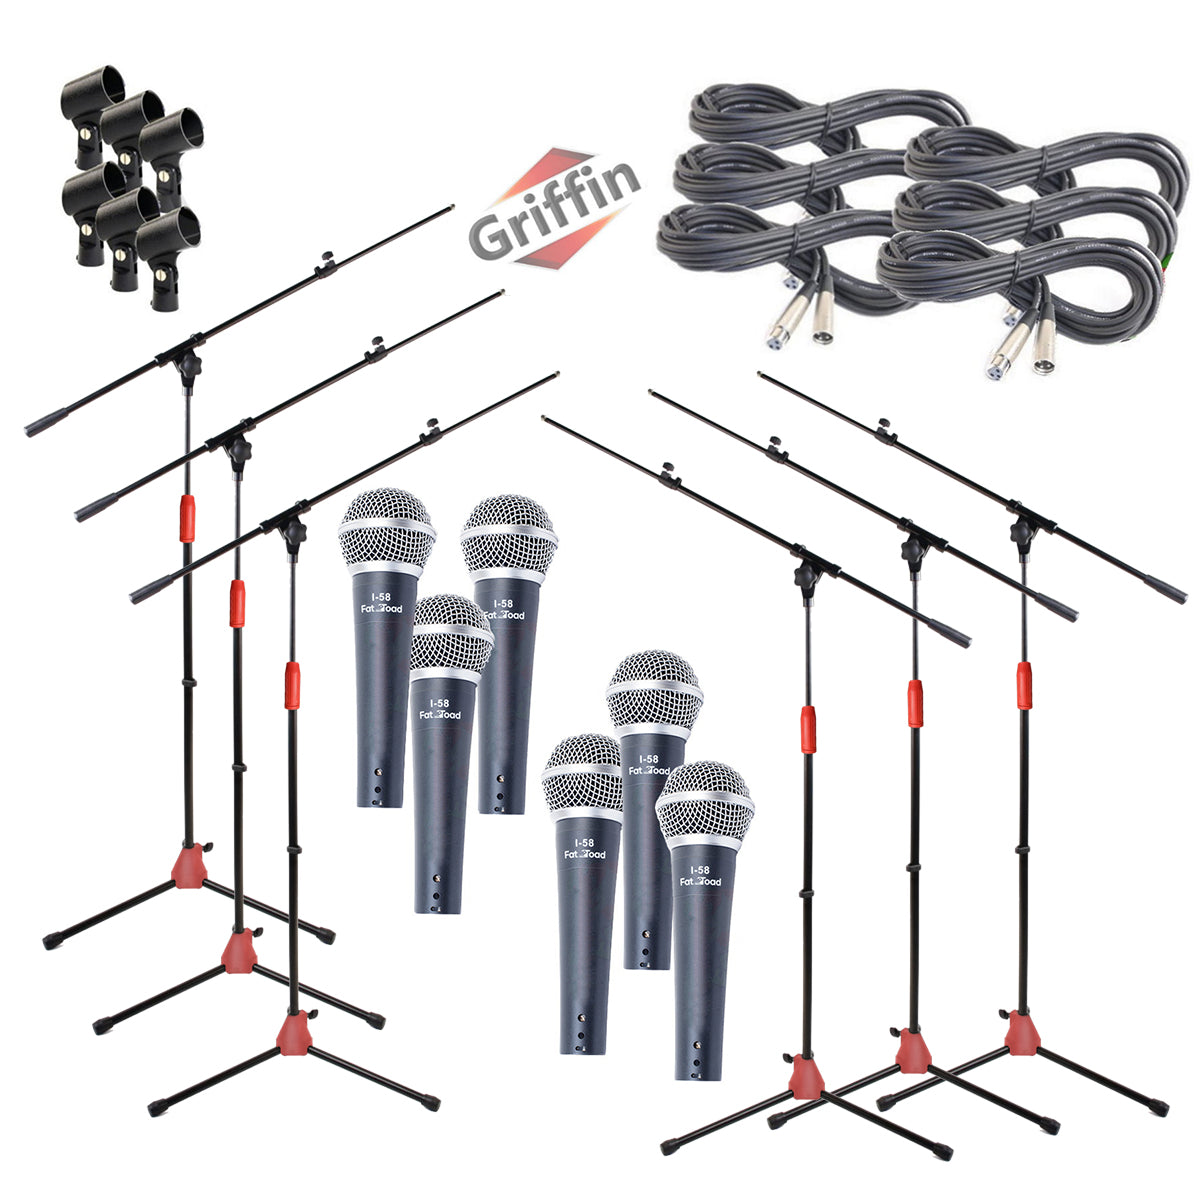 Microphone Boom Stand (GRIFFIN 6 Pack) with Cardioid Vocal Microphones & XLR Mic Cables - Karaoke Holder & Tripod Mount - Handheld Unidirectional Mics